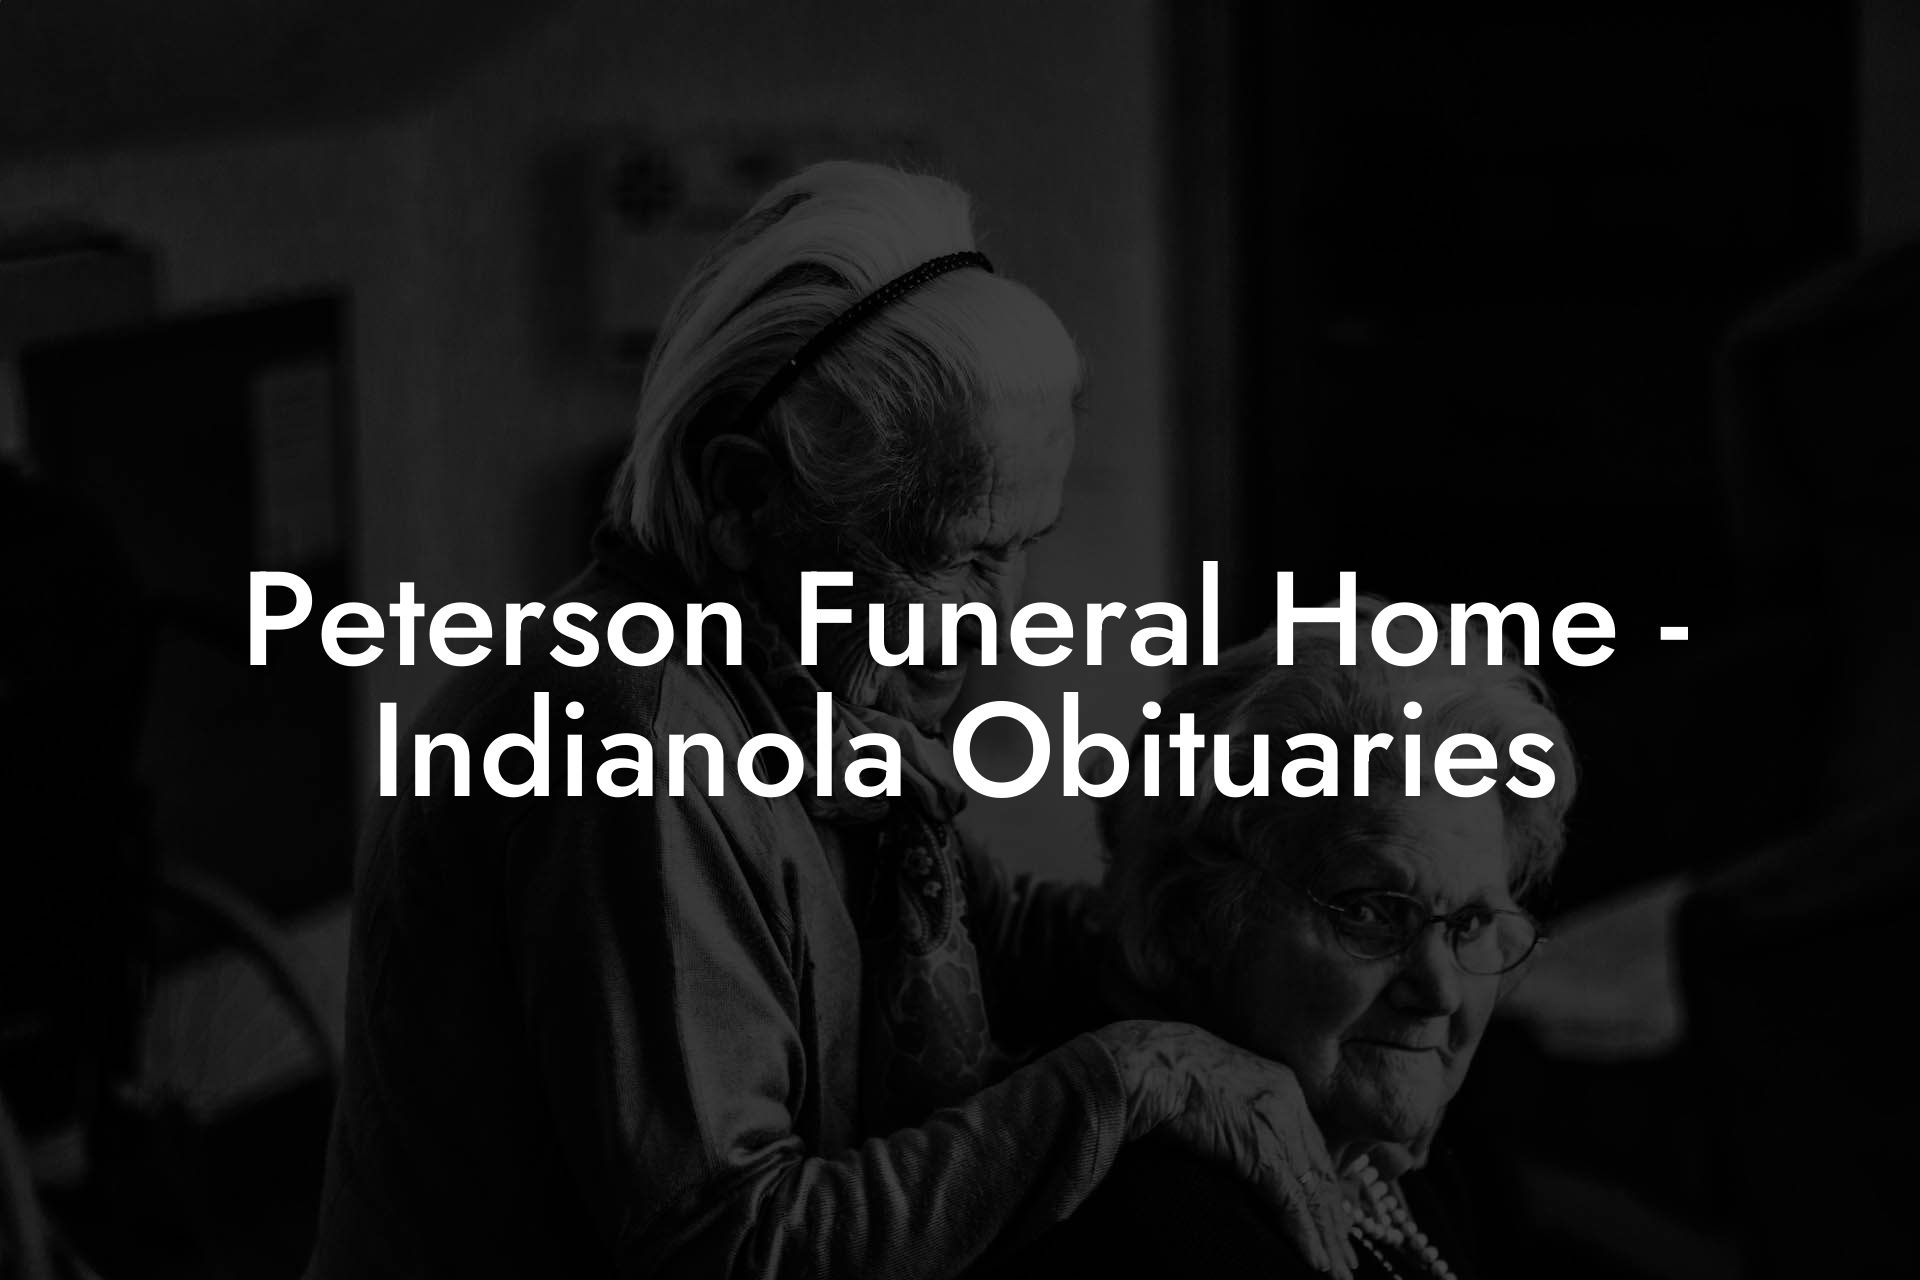 Peterson Funeral Home - Indianola Obituaries